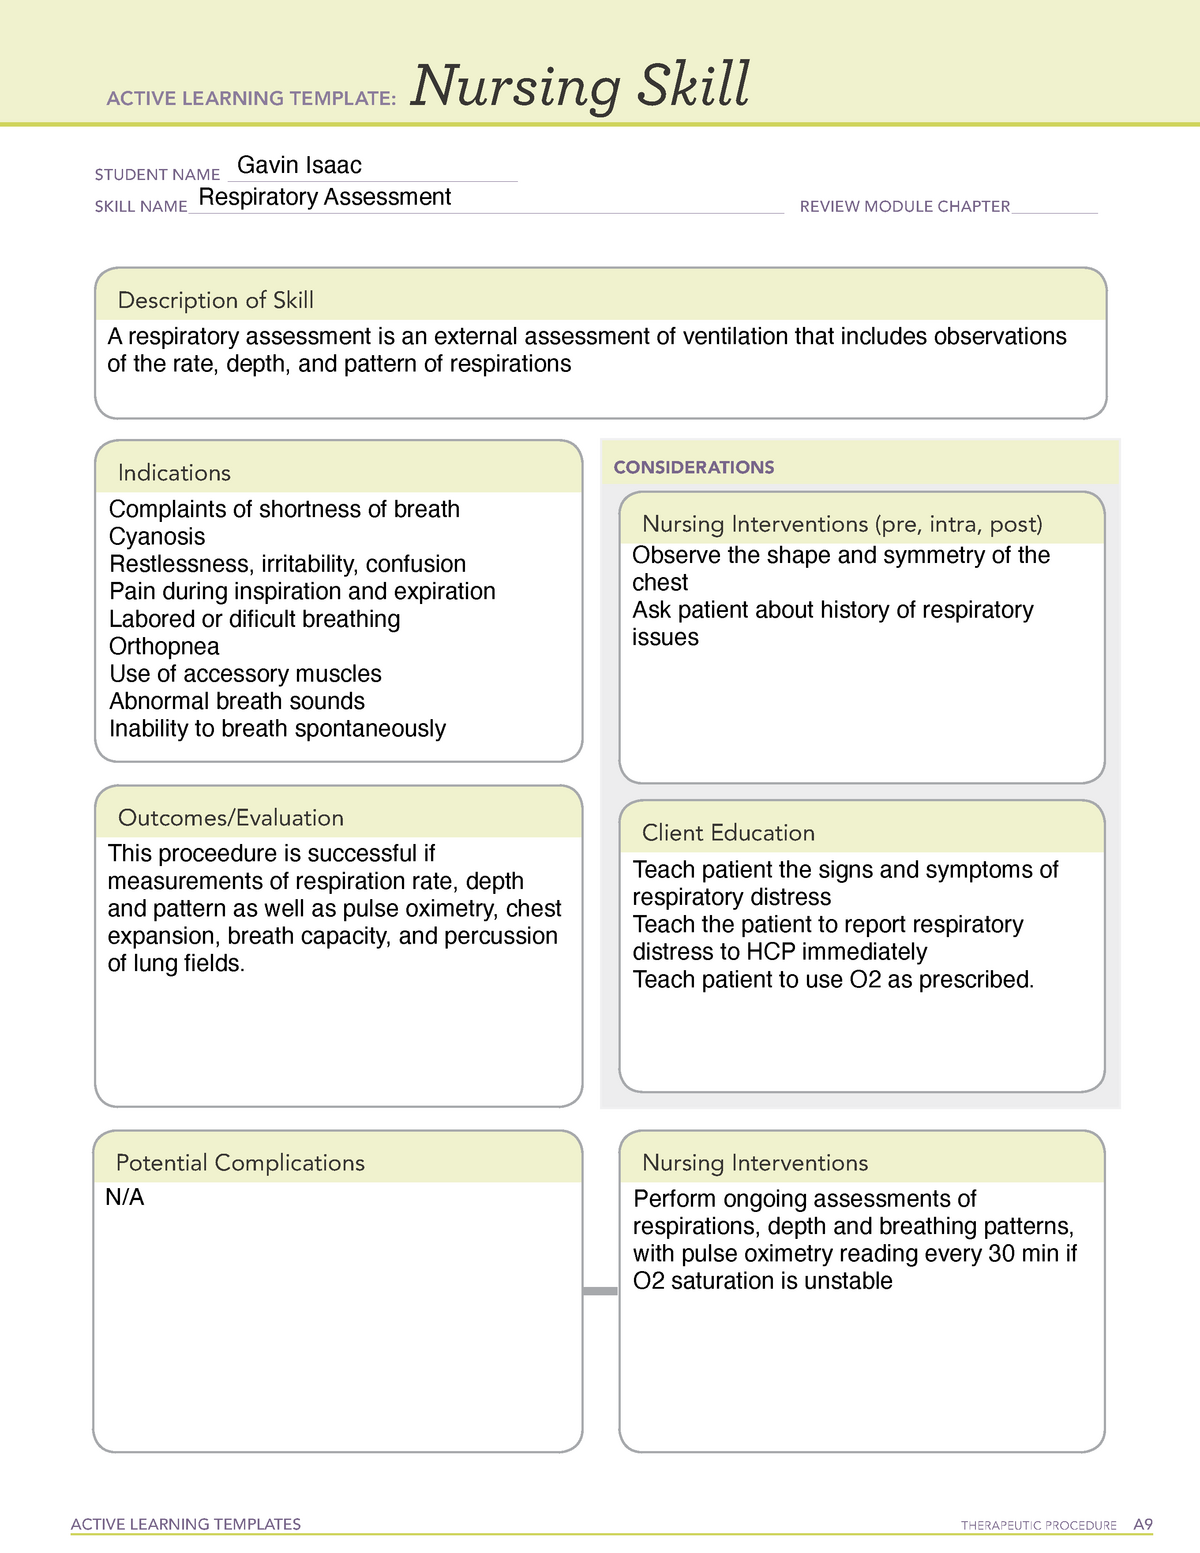 Skill Resp Assessment Active Learning Template NUR 3219C Care